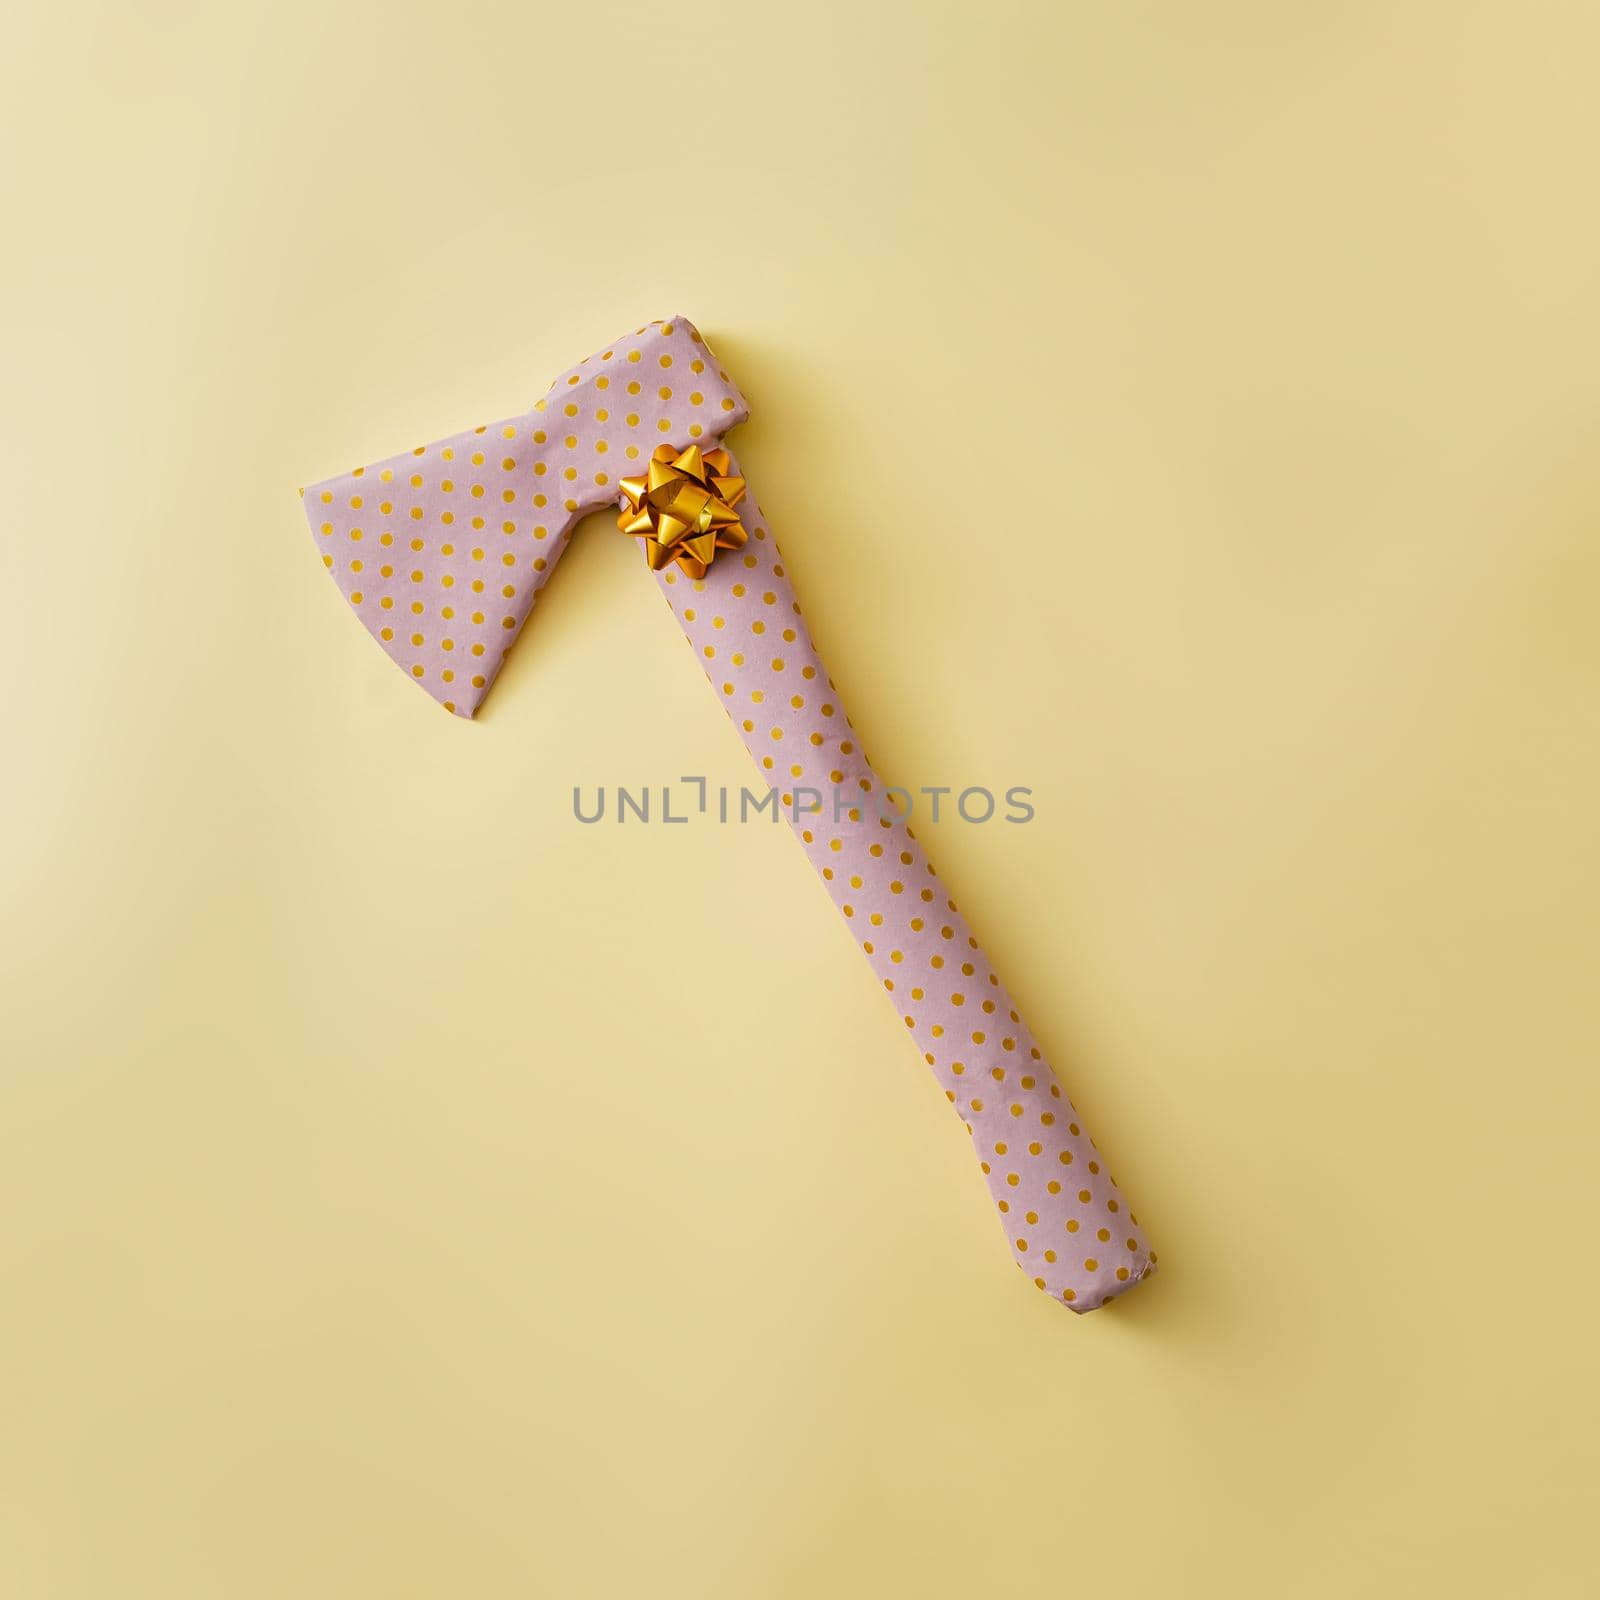 An ax wrapped as a gift with a golden bow. Joke concept and pastel color.